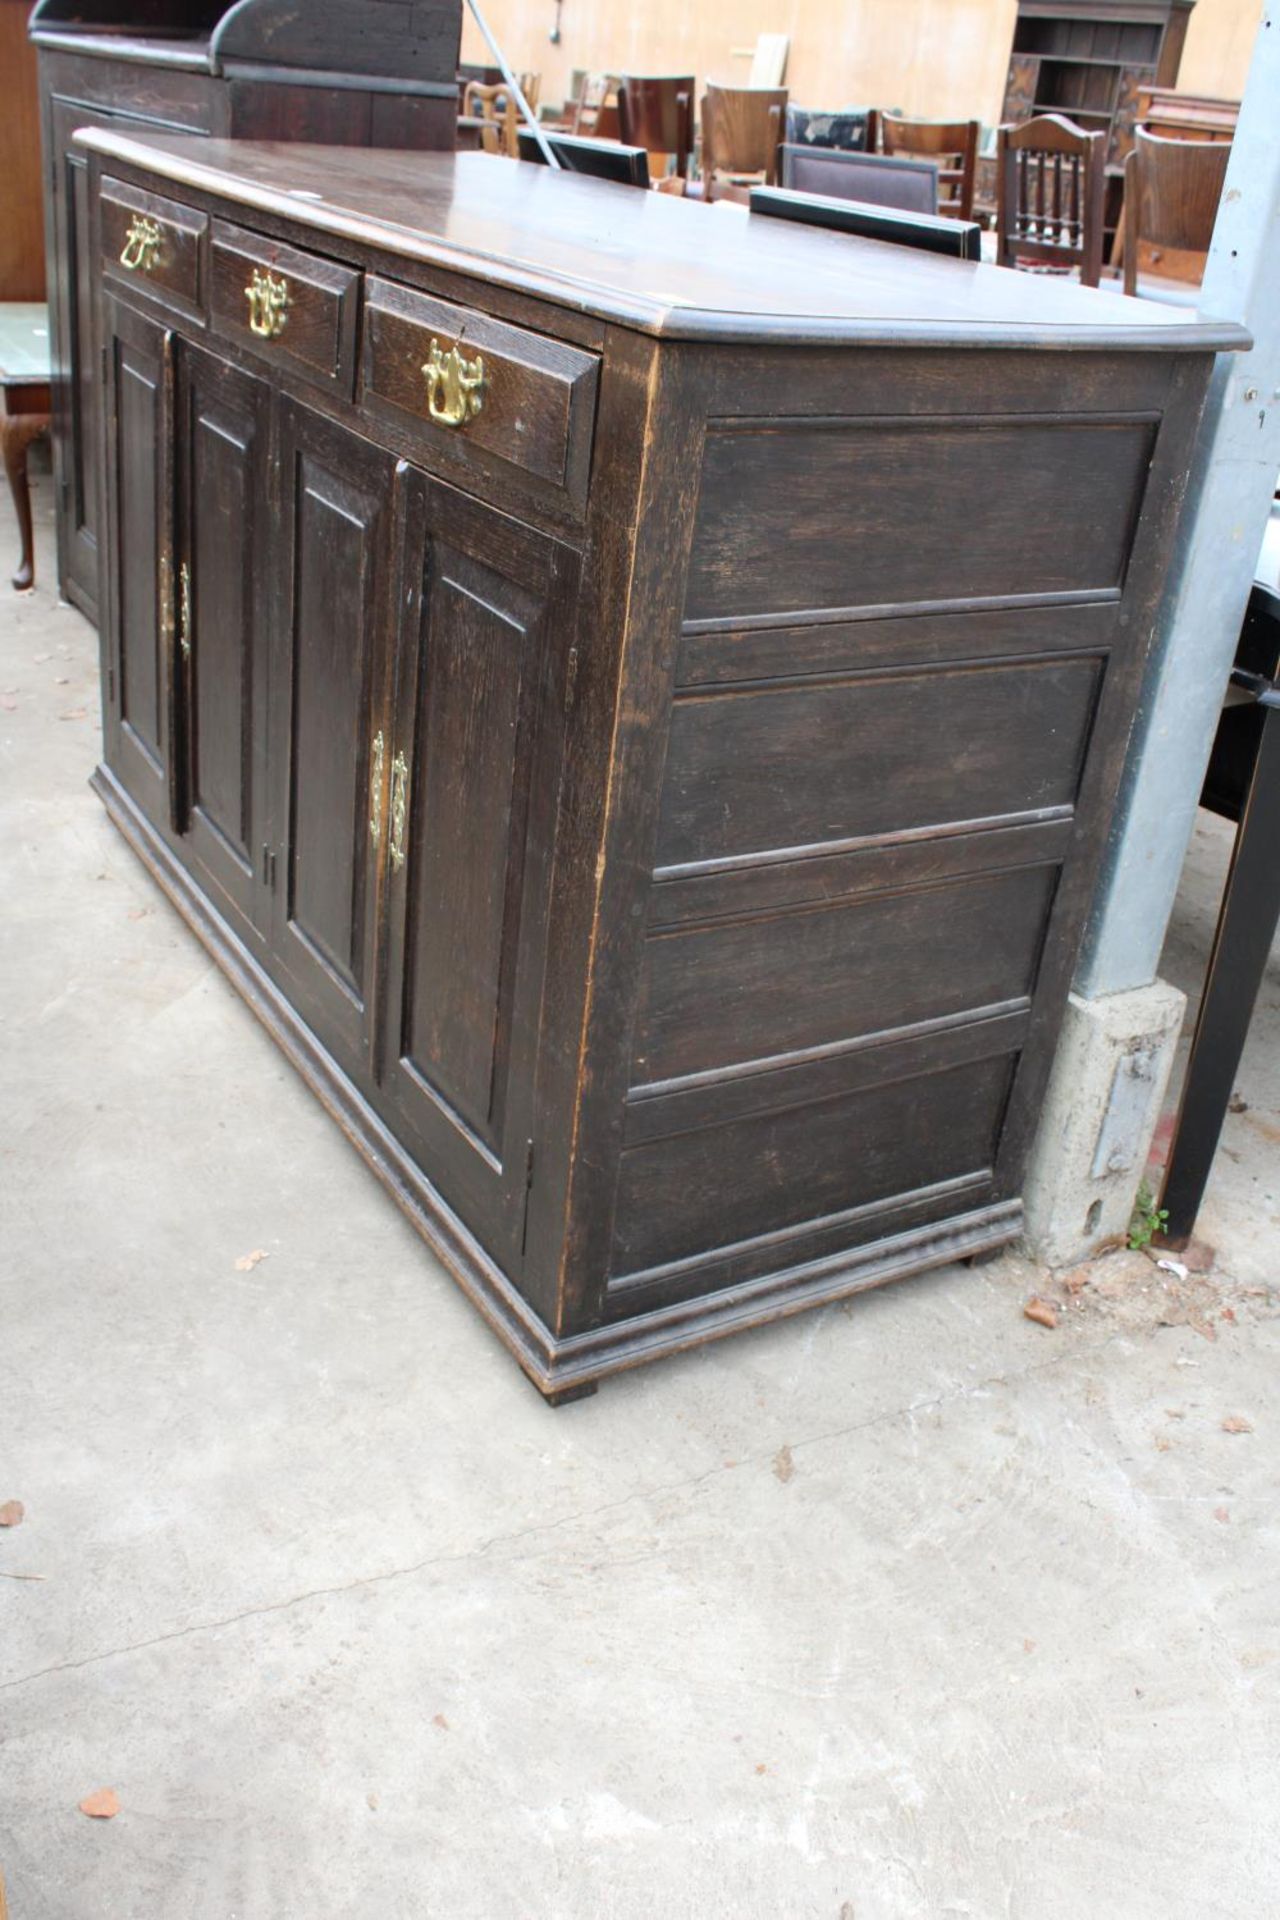 AN OAK GEORGE III STYLE DRESSER WITH FOUR CUPBOARDS AND THREE DRAWERS AND BRASS HANDLES, 60" WIDE - Bild 2 aus 4